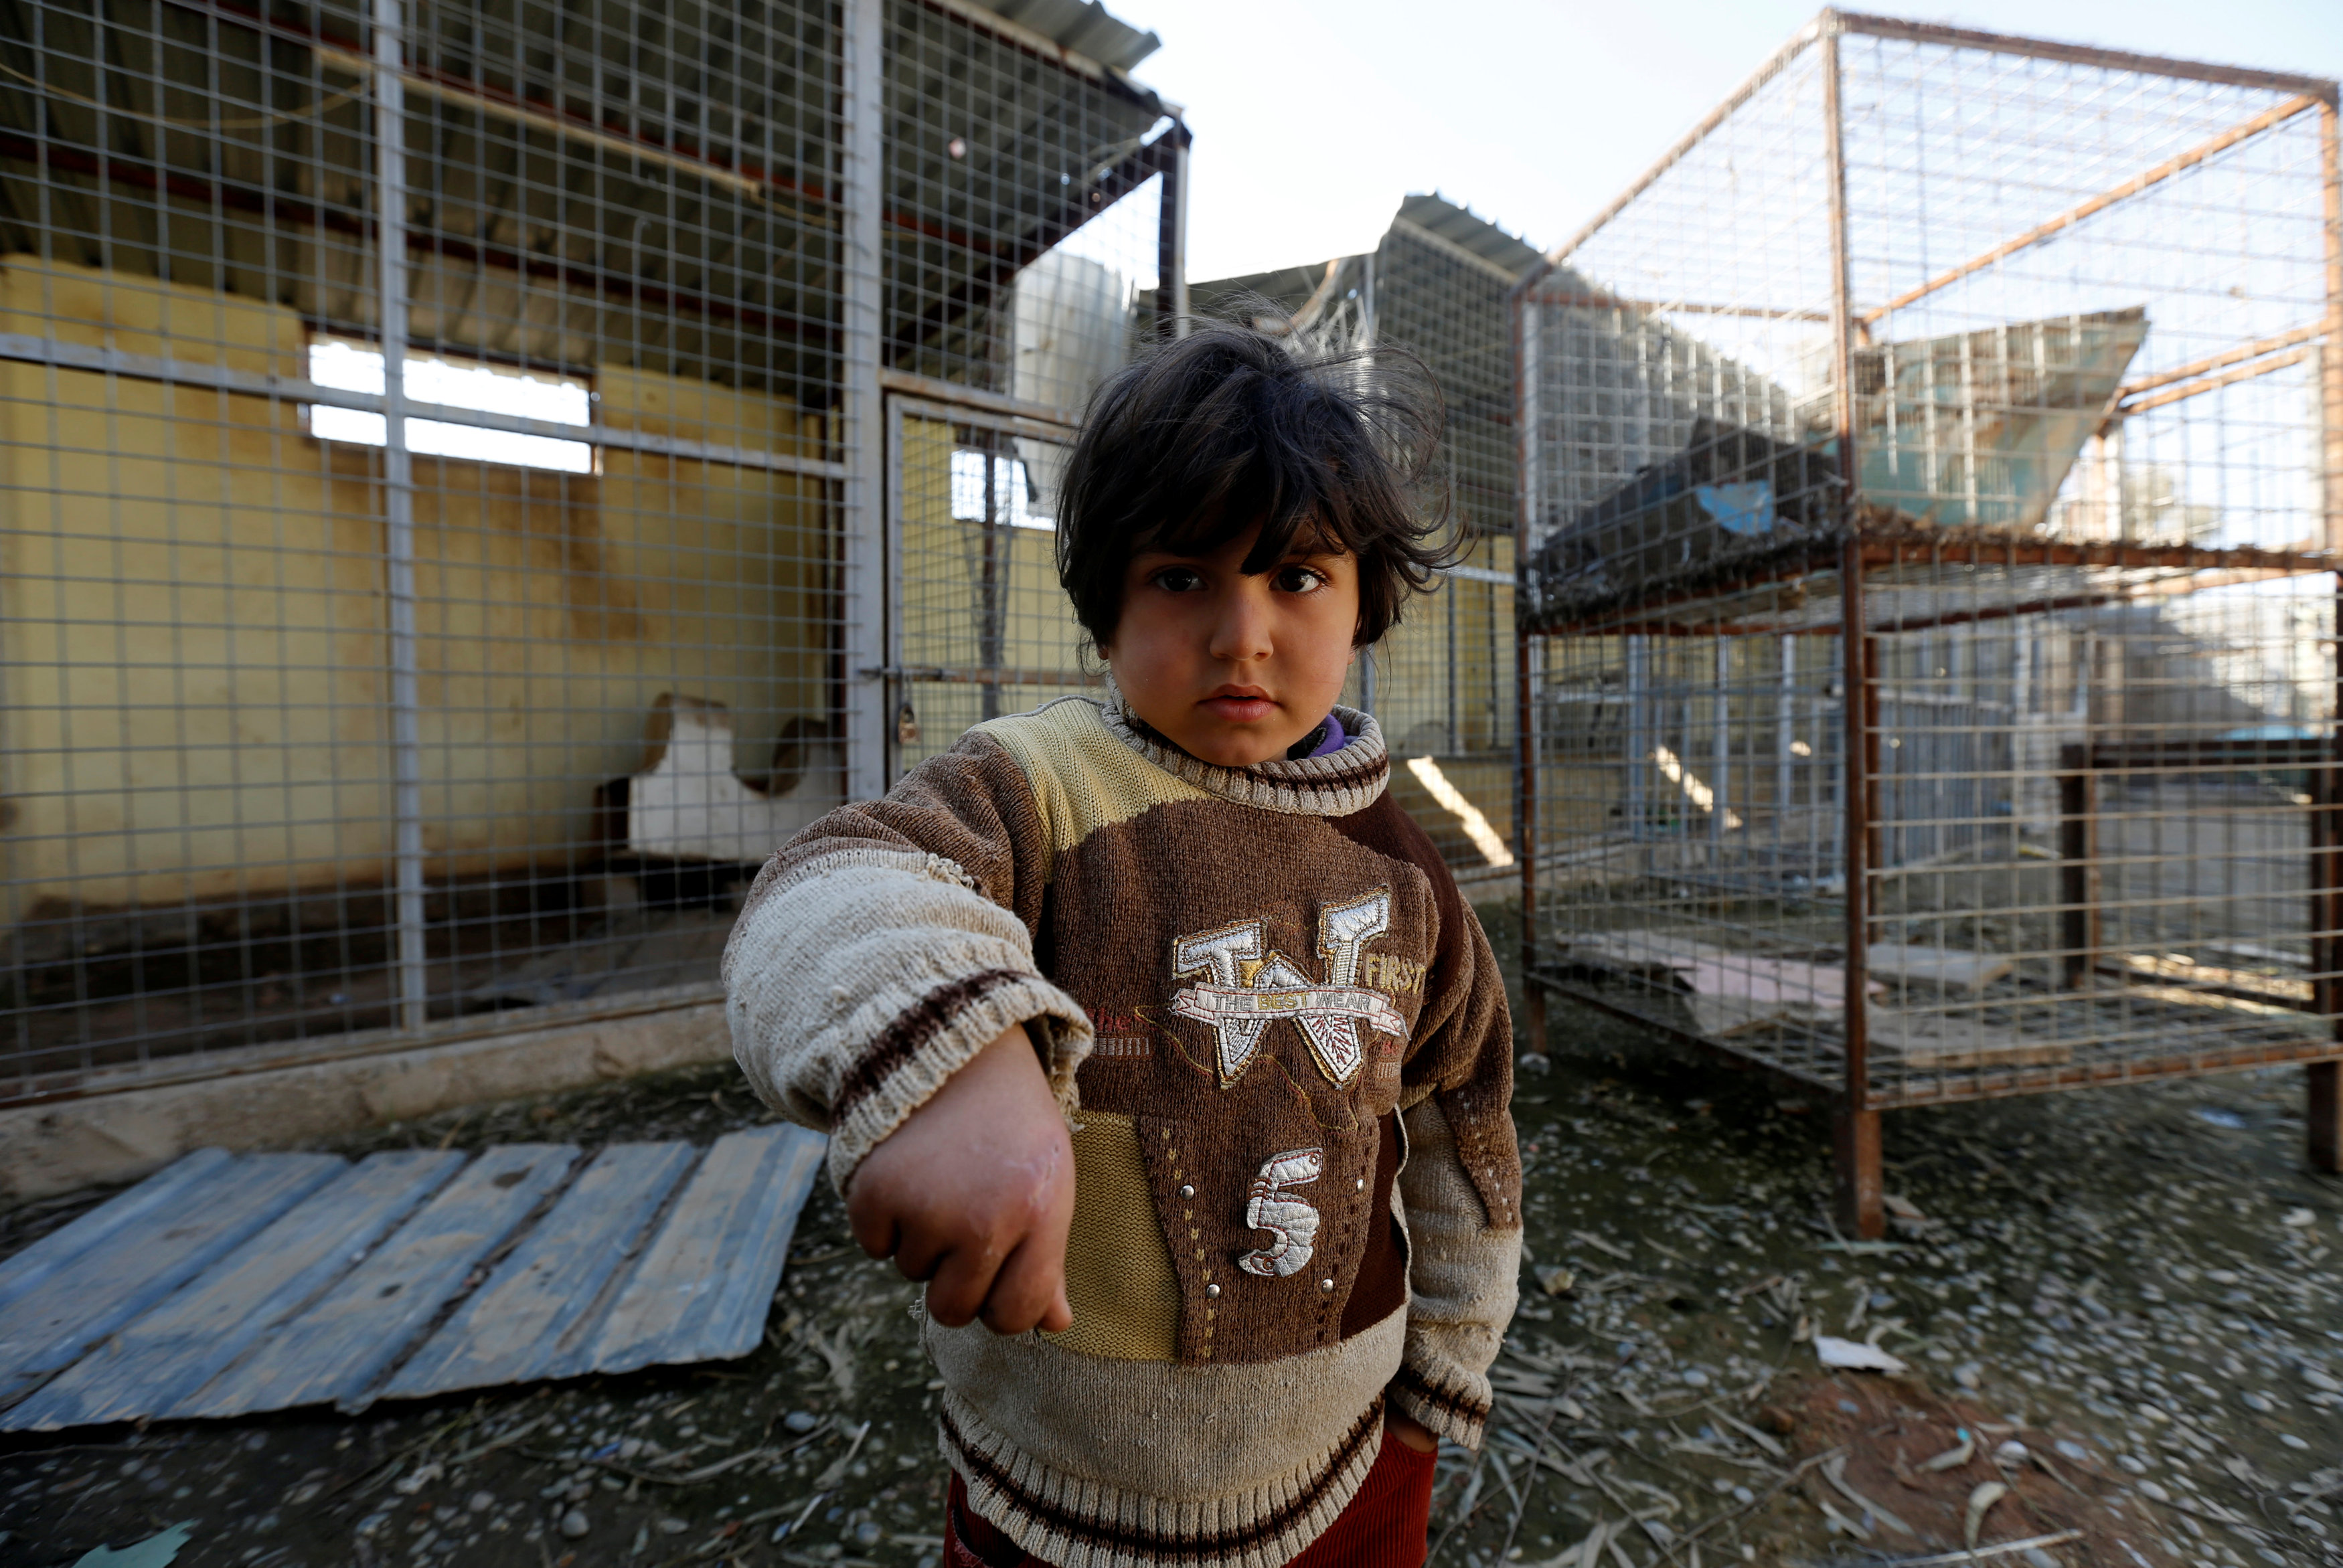 A child shows his hand bit by monkey at Mosul's zoo, Iraq, February 2, 2017. REUTERS/Muhammad Hamed